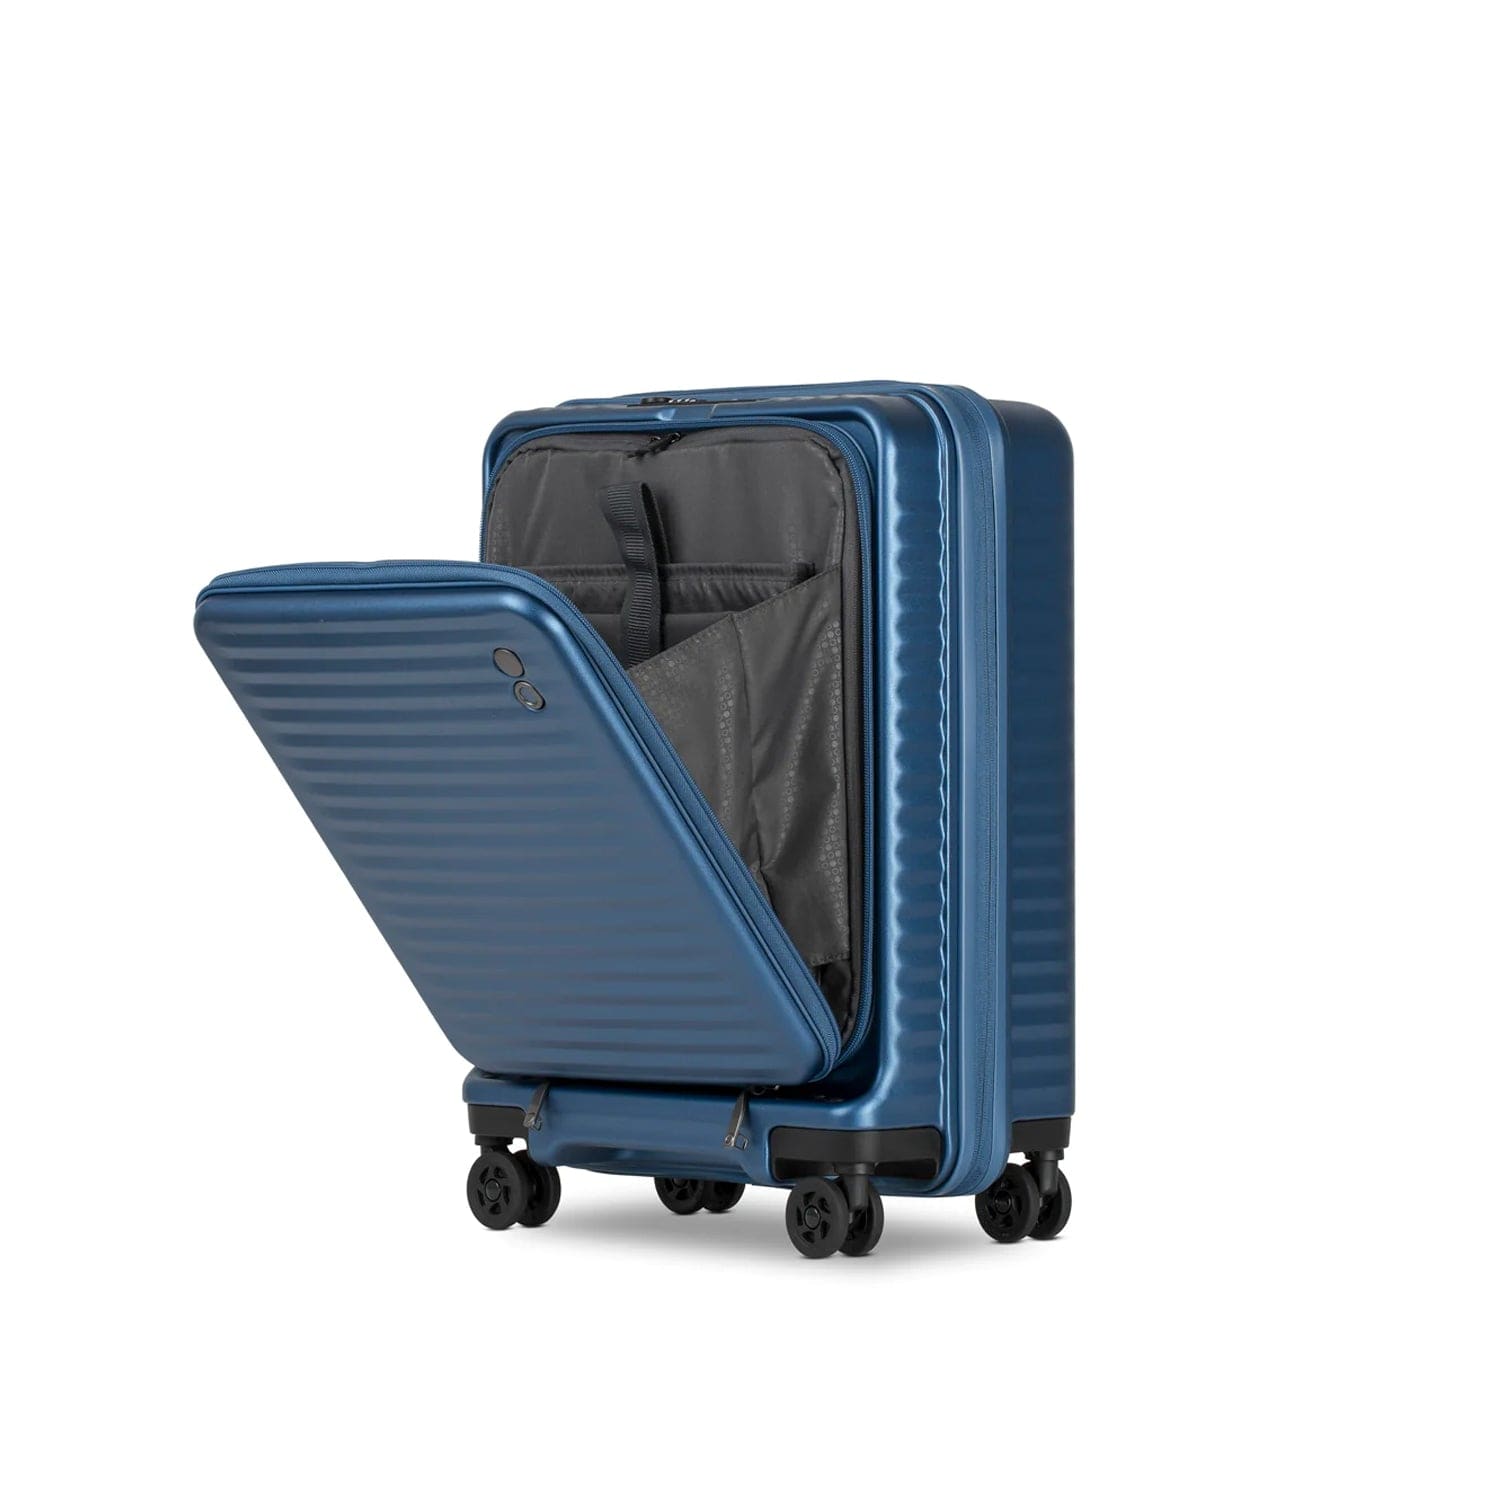 Shop EcholacLuggage Marco 3 Piece Set Luggage at Gabee Online- Bags of  difference since 1949